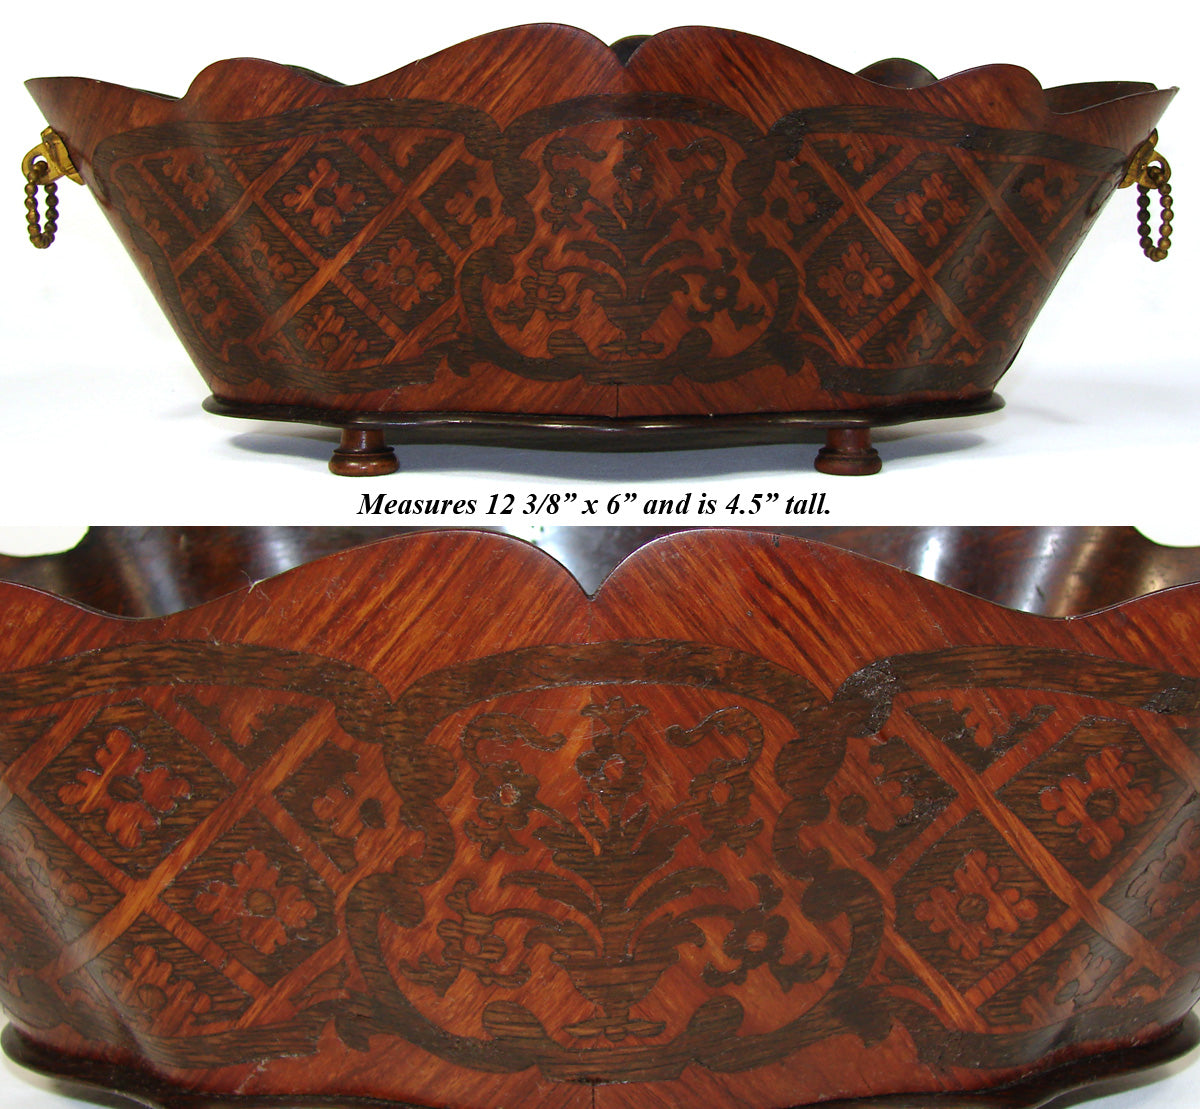 Rare Antique French Napoleon III 12.5" Jardiniere, Serpentine Wood with Marquetry Inlay